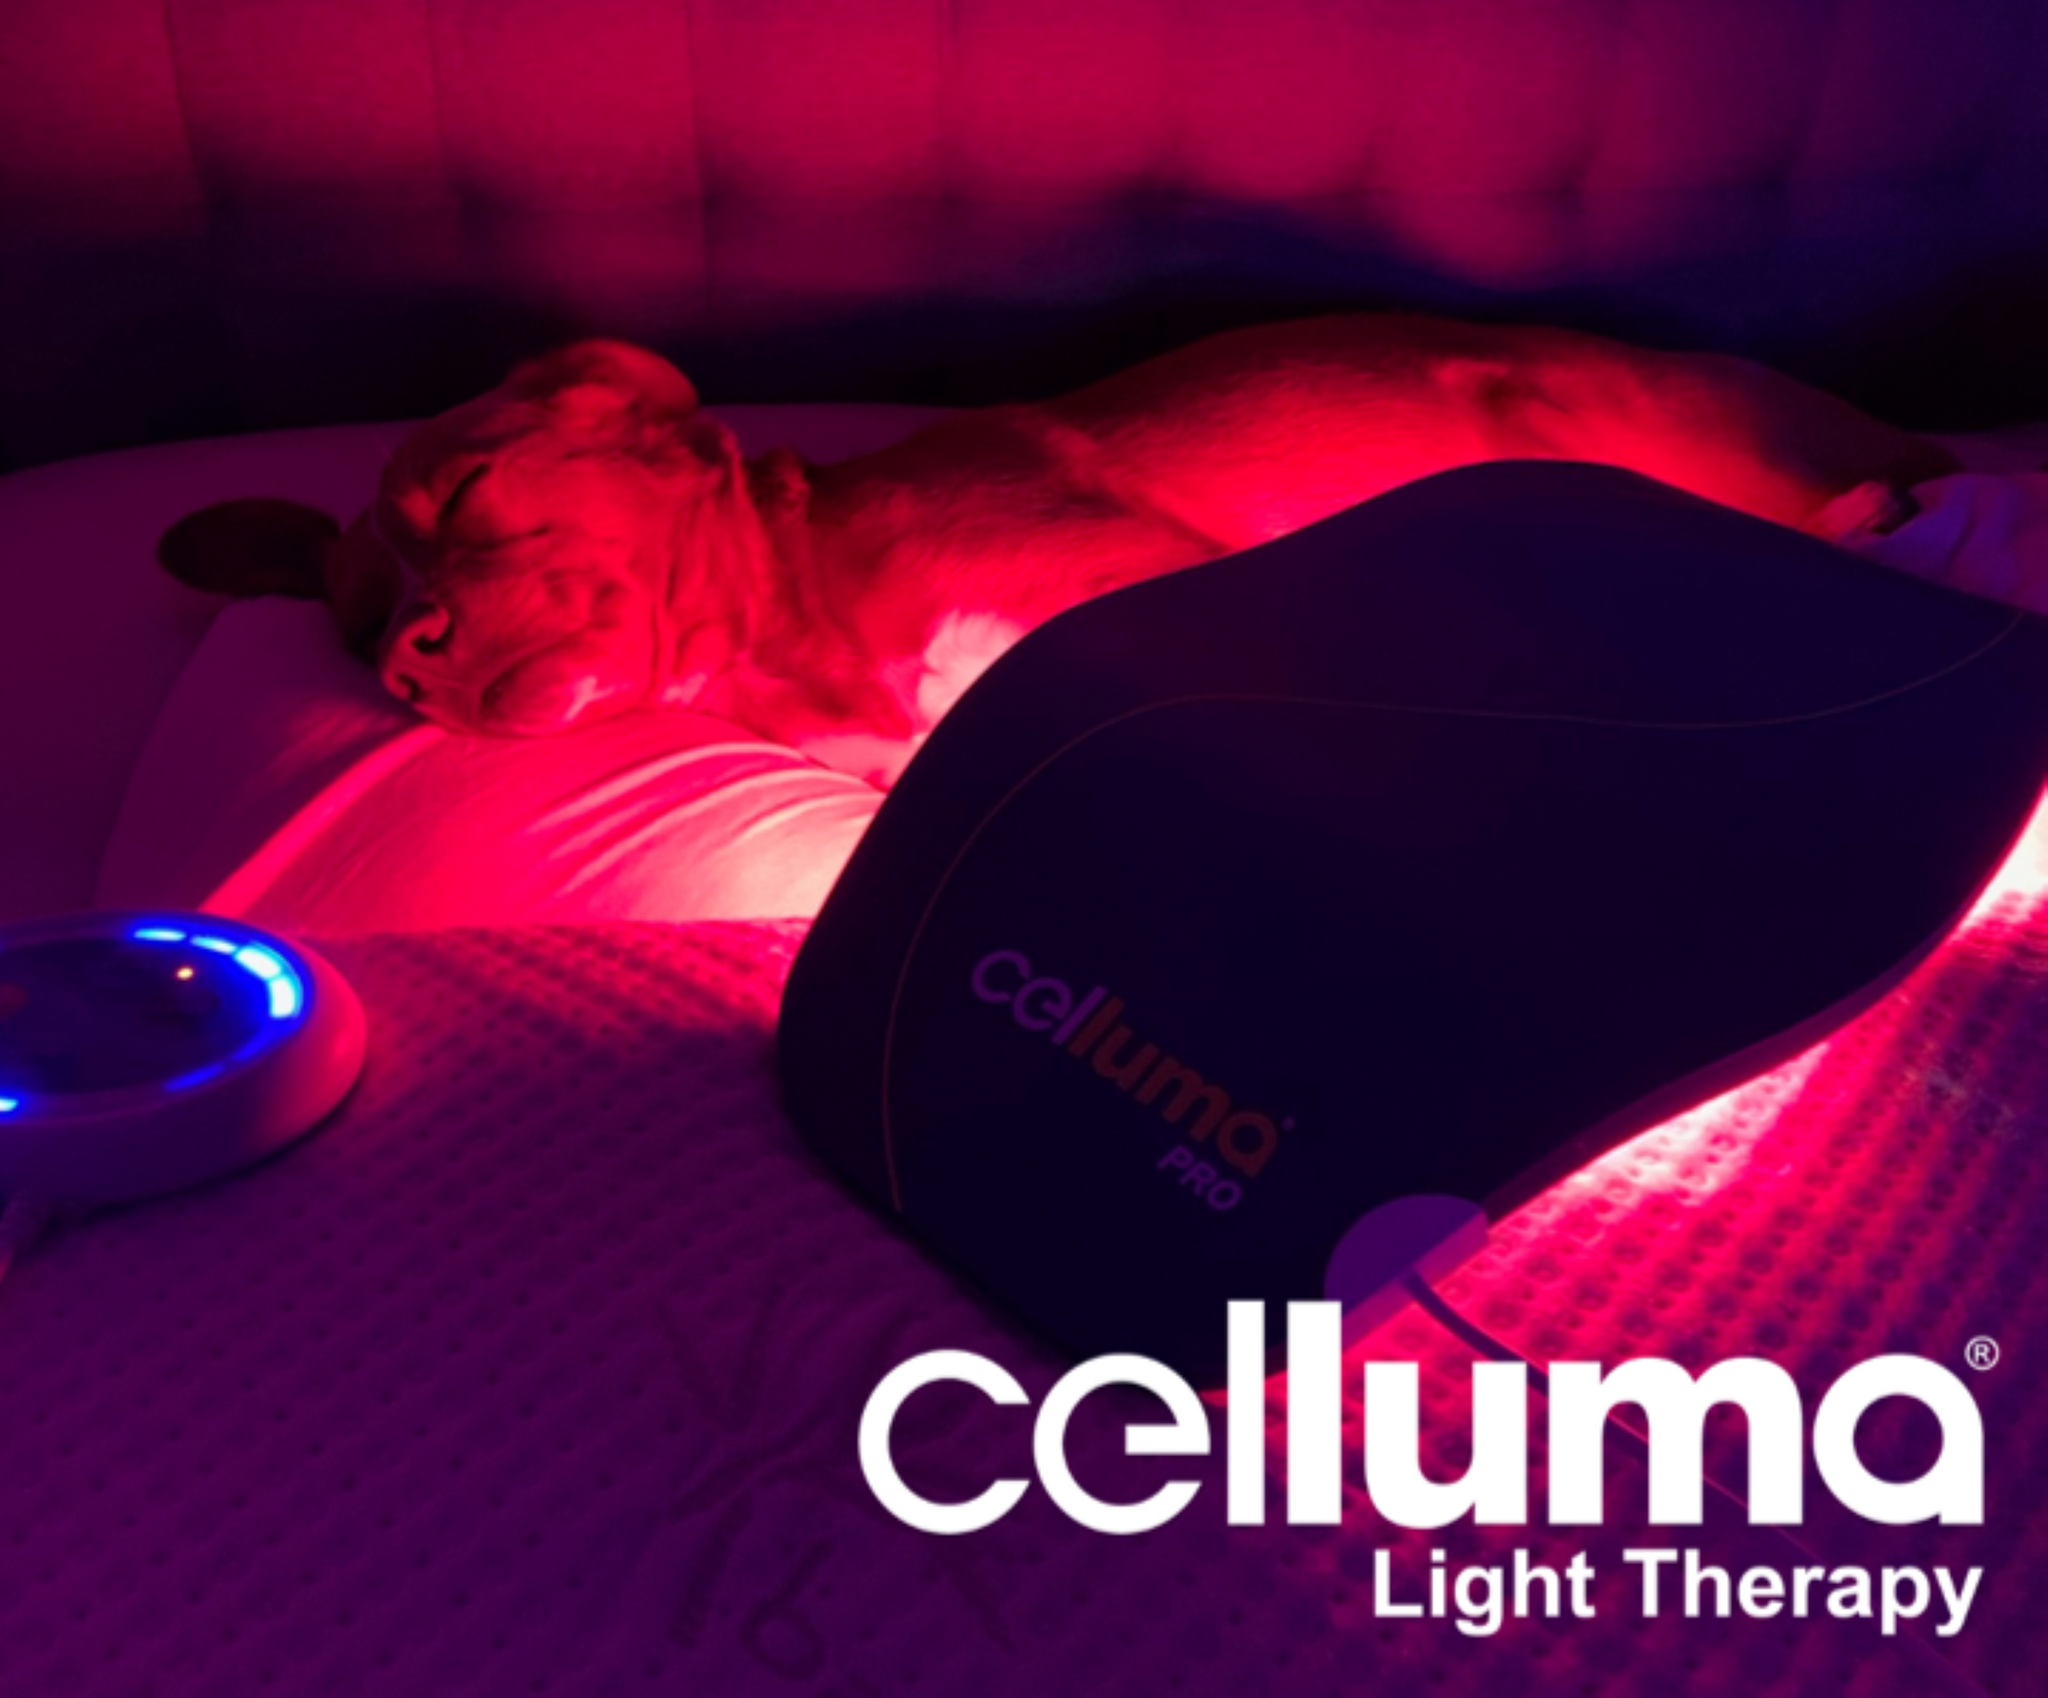 Celluma red light therapy device used to treat a wound on a dog's legs